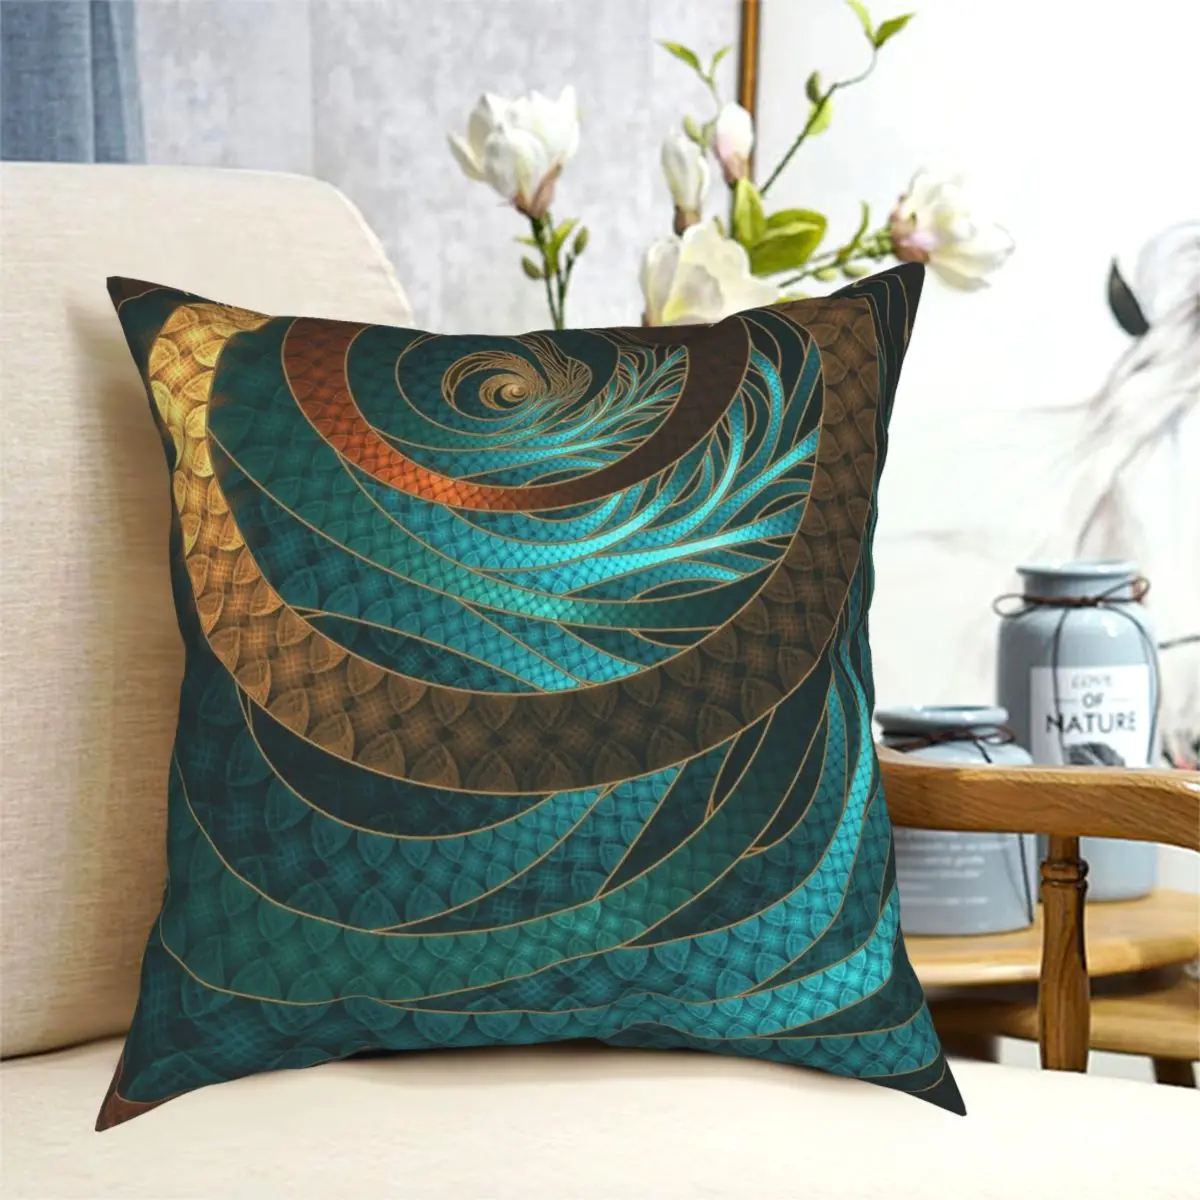 

Beautiful Corded Leather Turquoise Fractal Bangles Square Pillowcase Creative Decor Throw Pillow Case for Bed Cushion Case 45*45